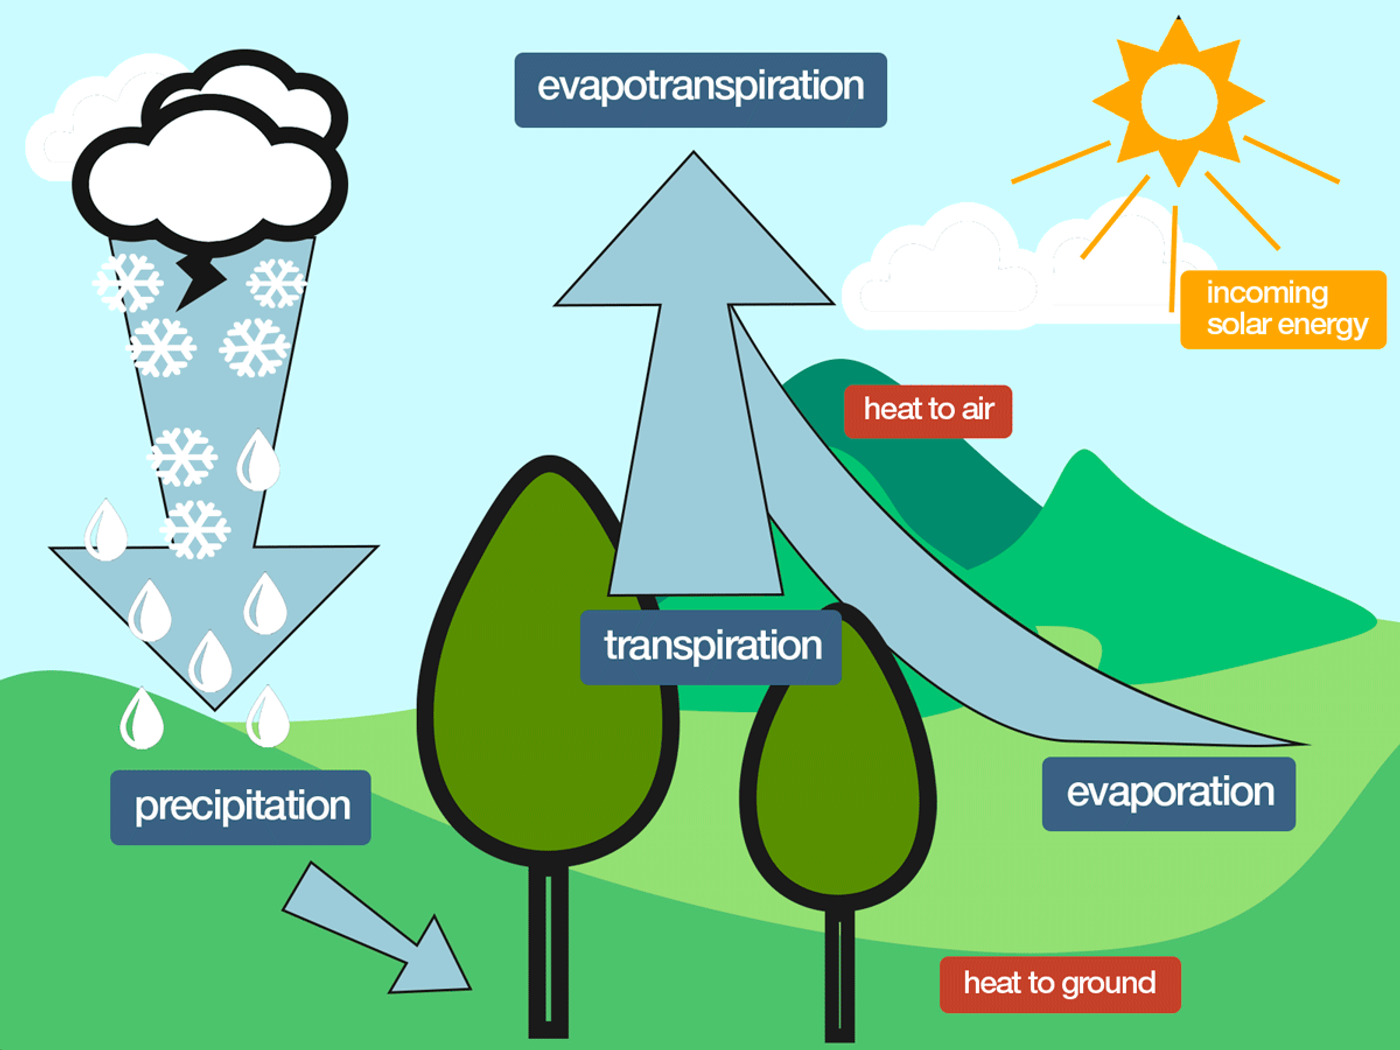 Evapotranspiration from trees may help reduce air temperatures.